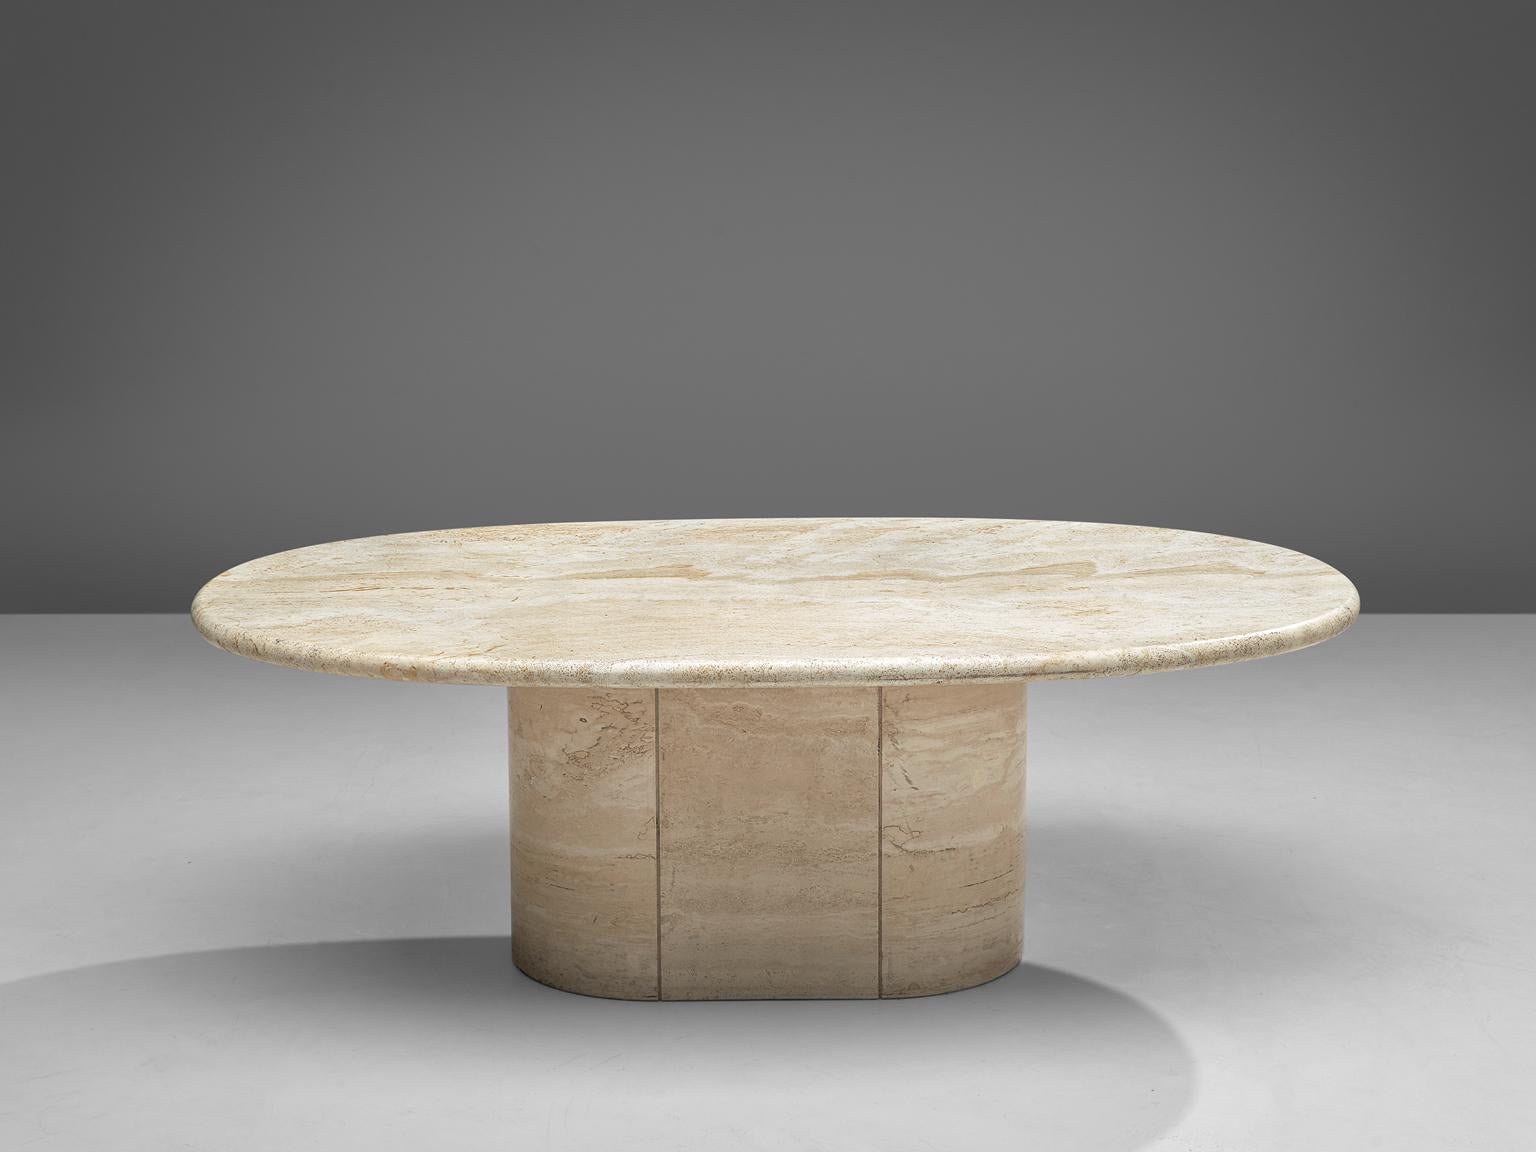 Coffee table, travertine, Italy, 1970s.

This strong coffee table features a massive, oval foot and a thick, large oval travertine table top. The aesthetics are archetypical for postmodern design, bearing references to architectural forms and